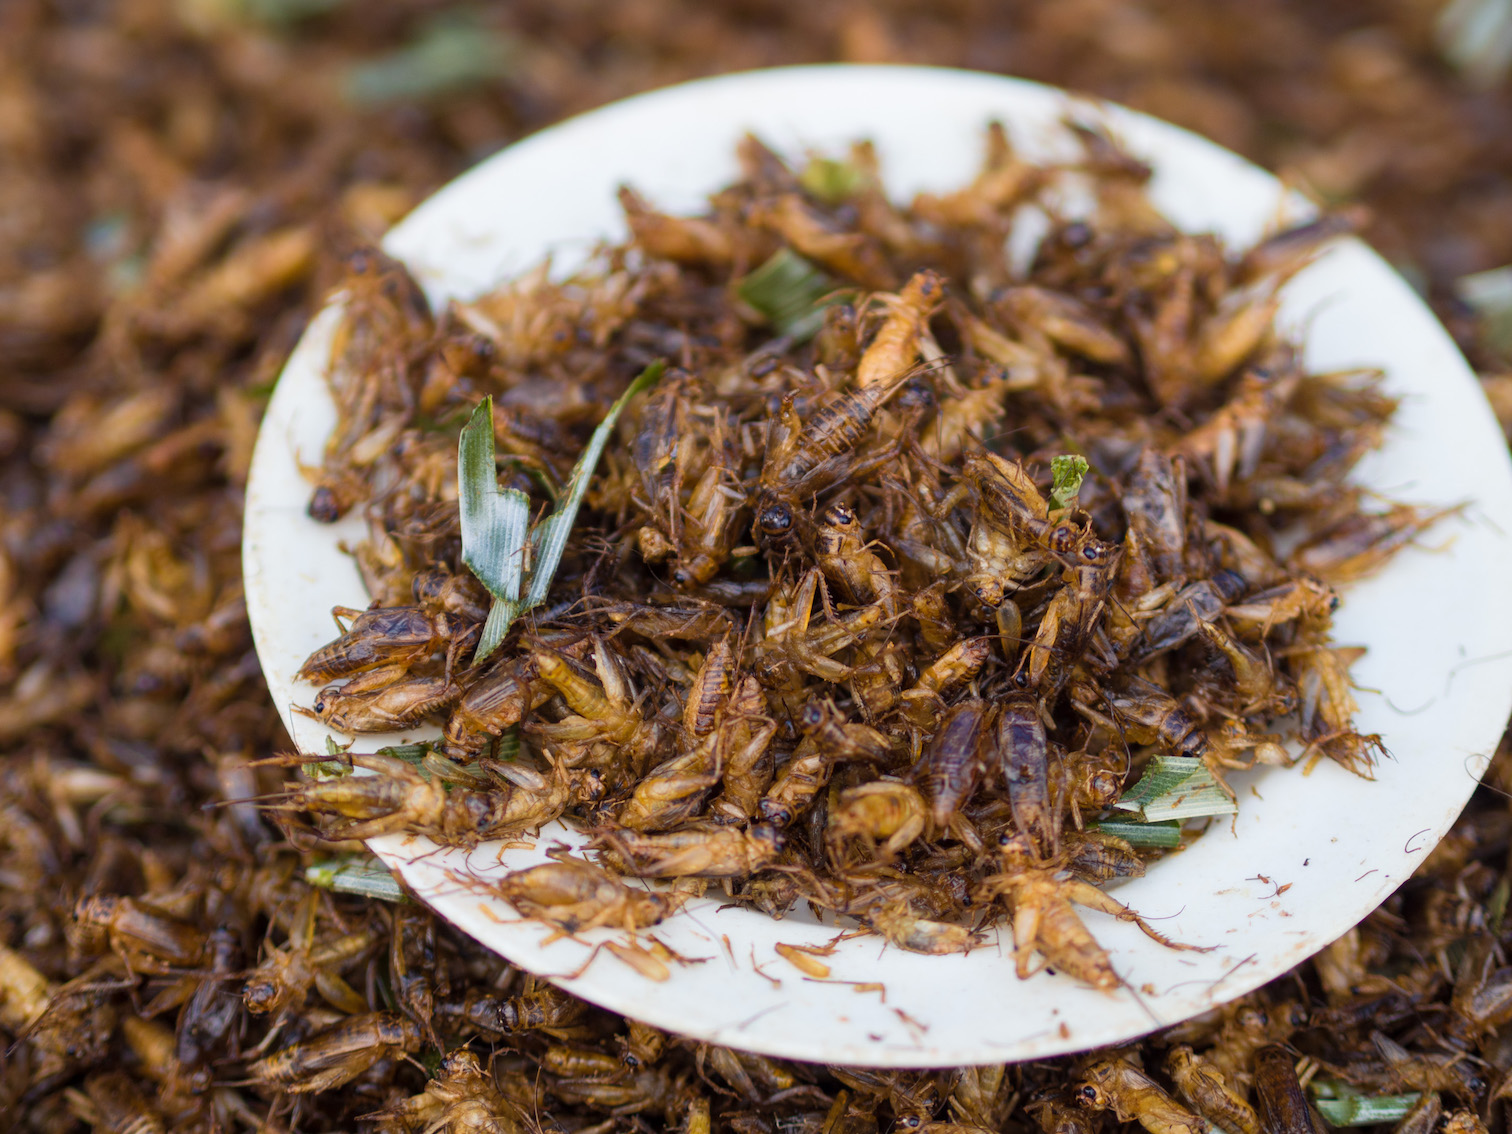 Image: You WILL eat the bugs: Major brands quietly slipping insects into your food